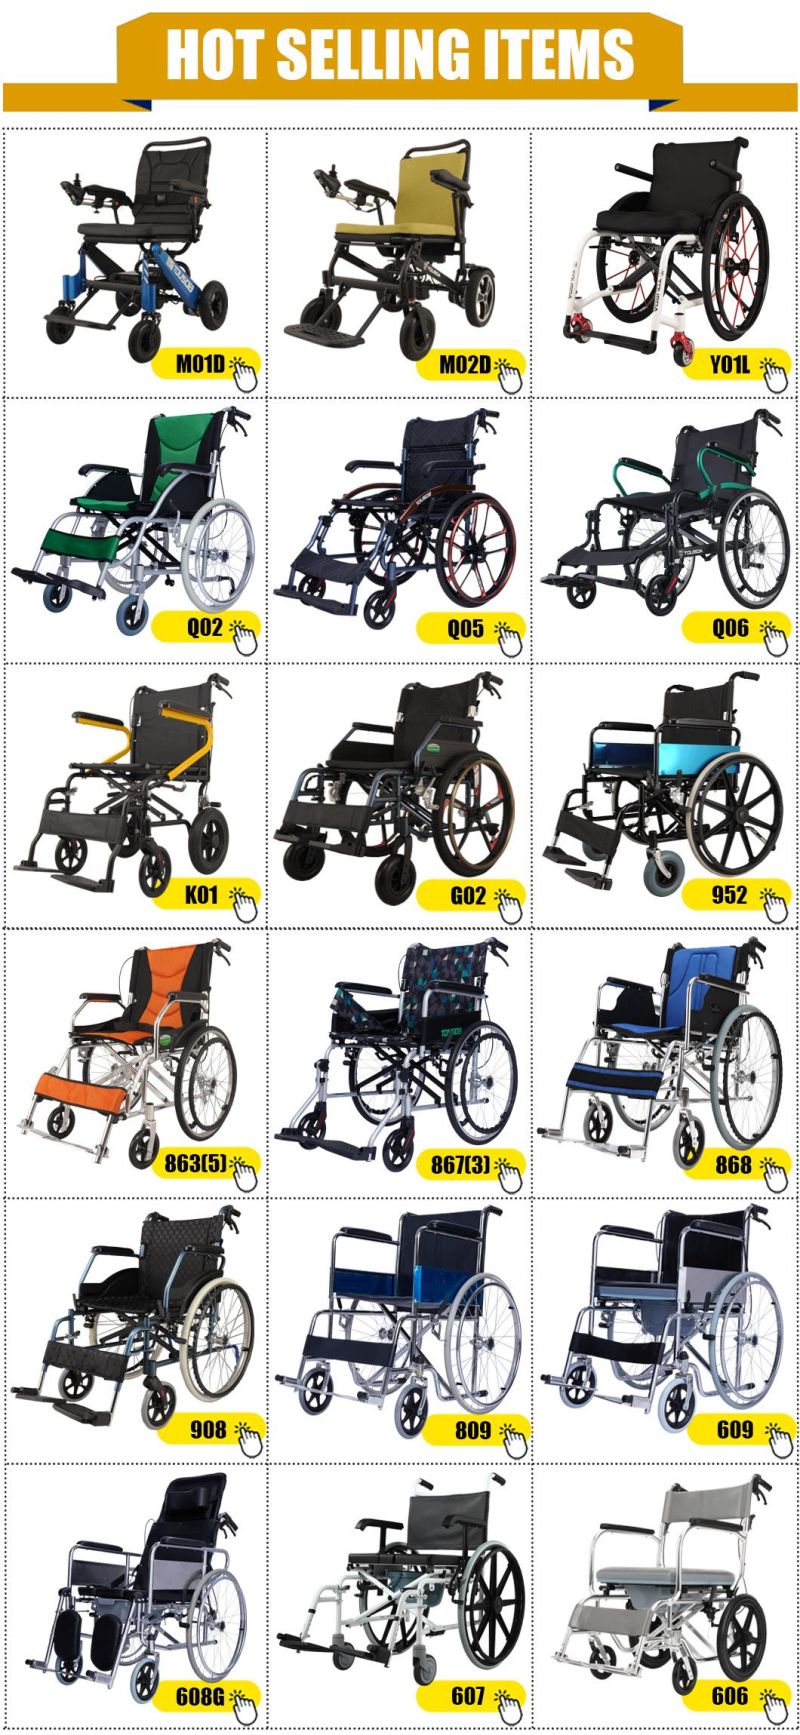 Comfortable and Safe Strollers Wheelchairs and Push Chairs for Special Need Kids